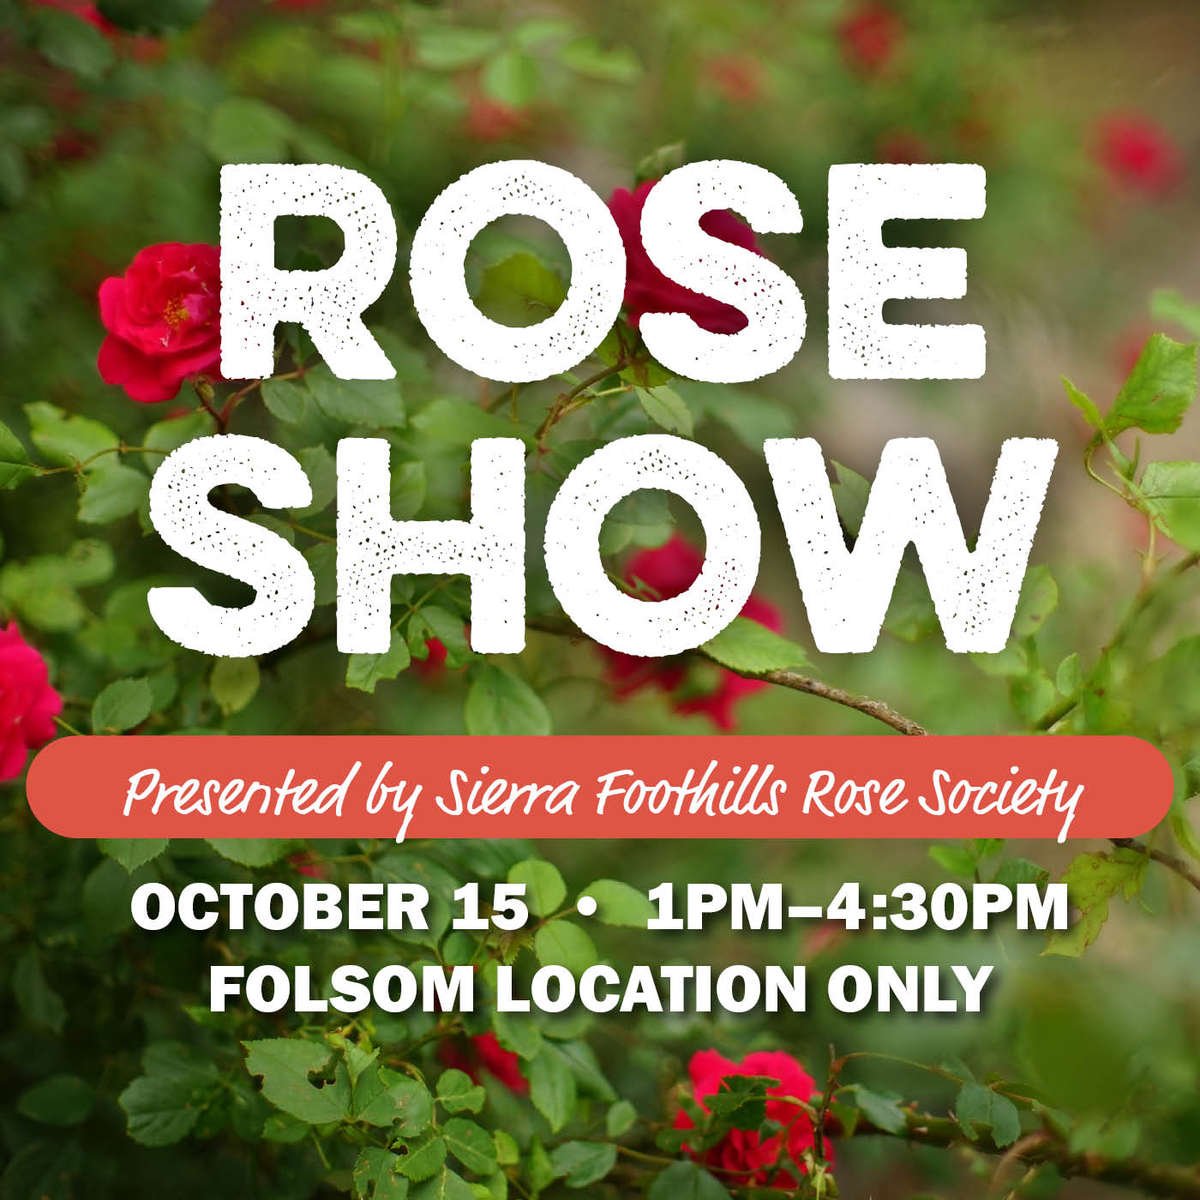 Rose Show: Presented By Sierra Foothills Rose Society October 15 1 PM to 4:30 PM Folsom Location Only